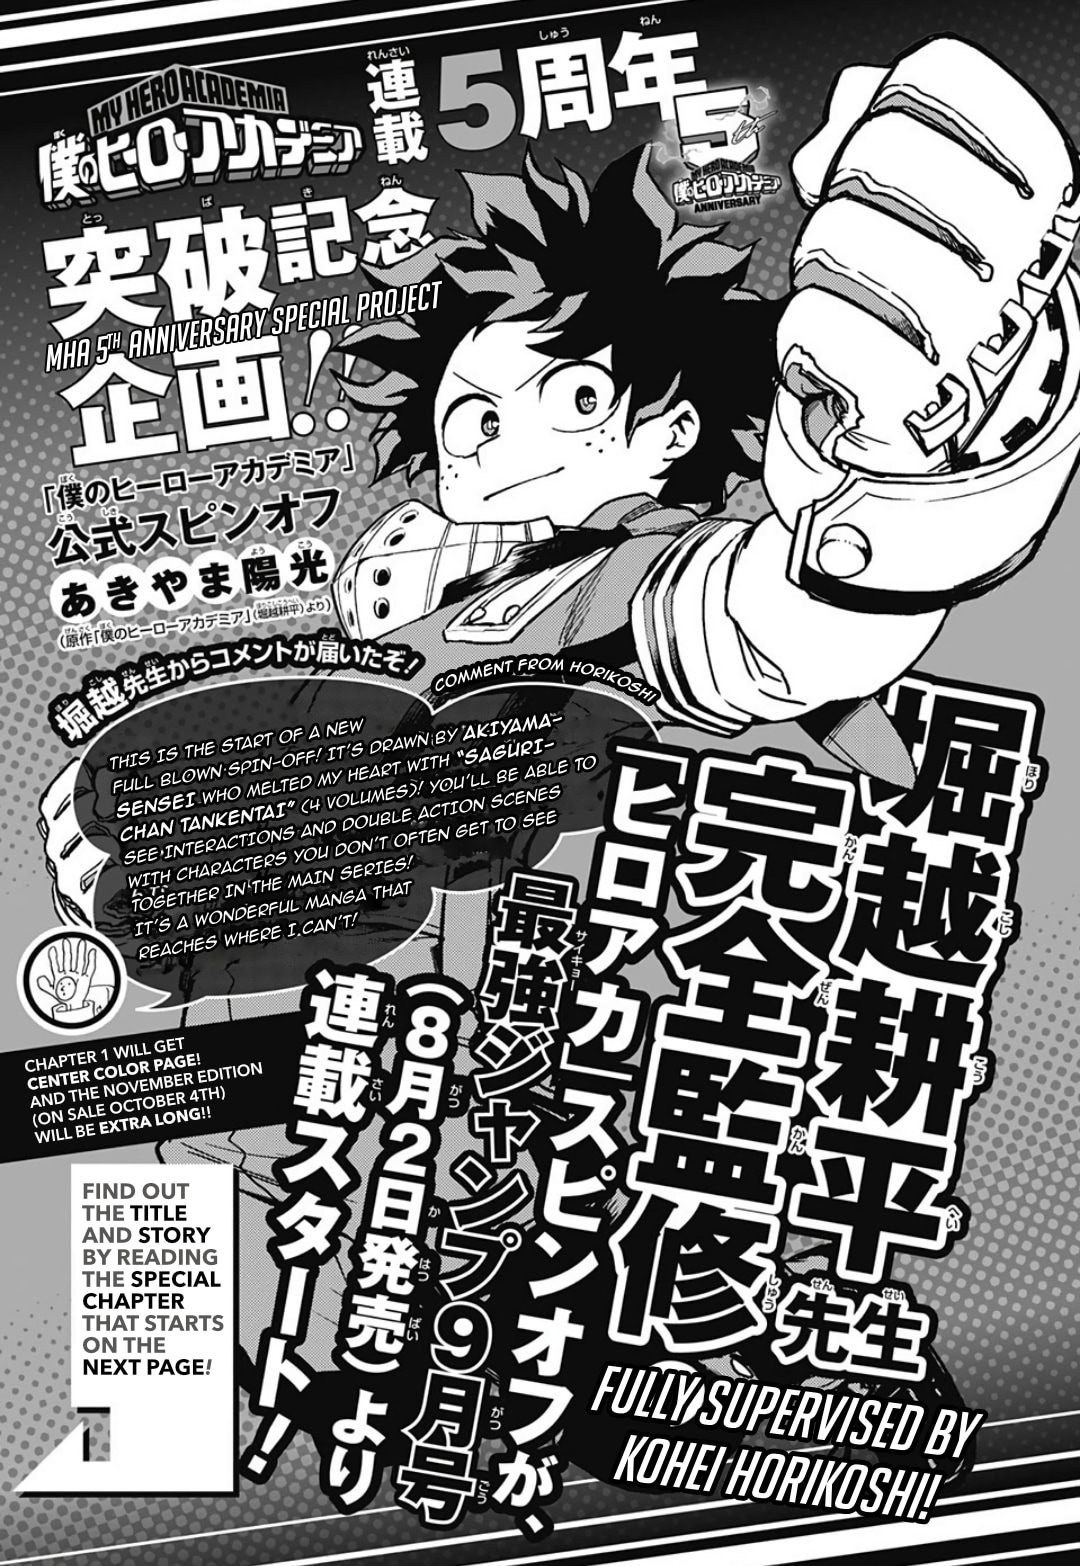 My Hero Academia Team Up Mission Vol. 1 Ch. 0 Jump GIGA Special Chapter